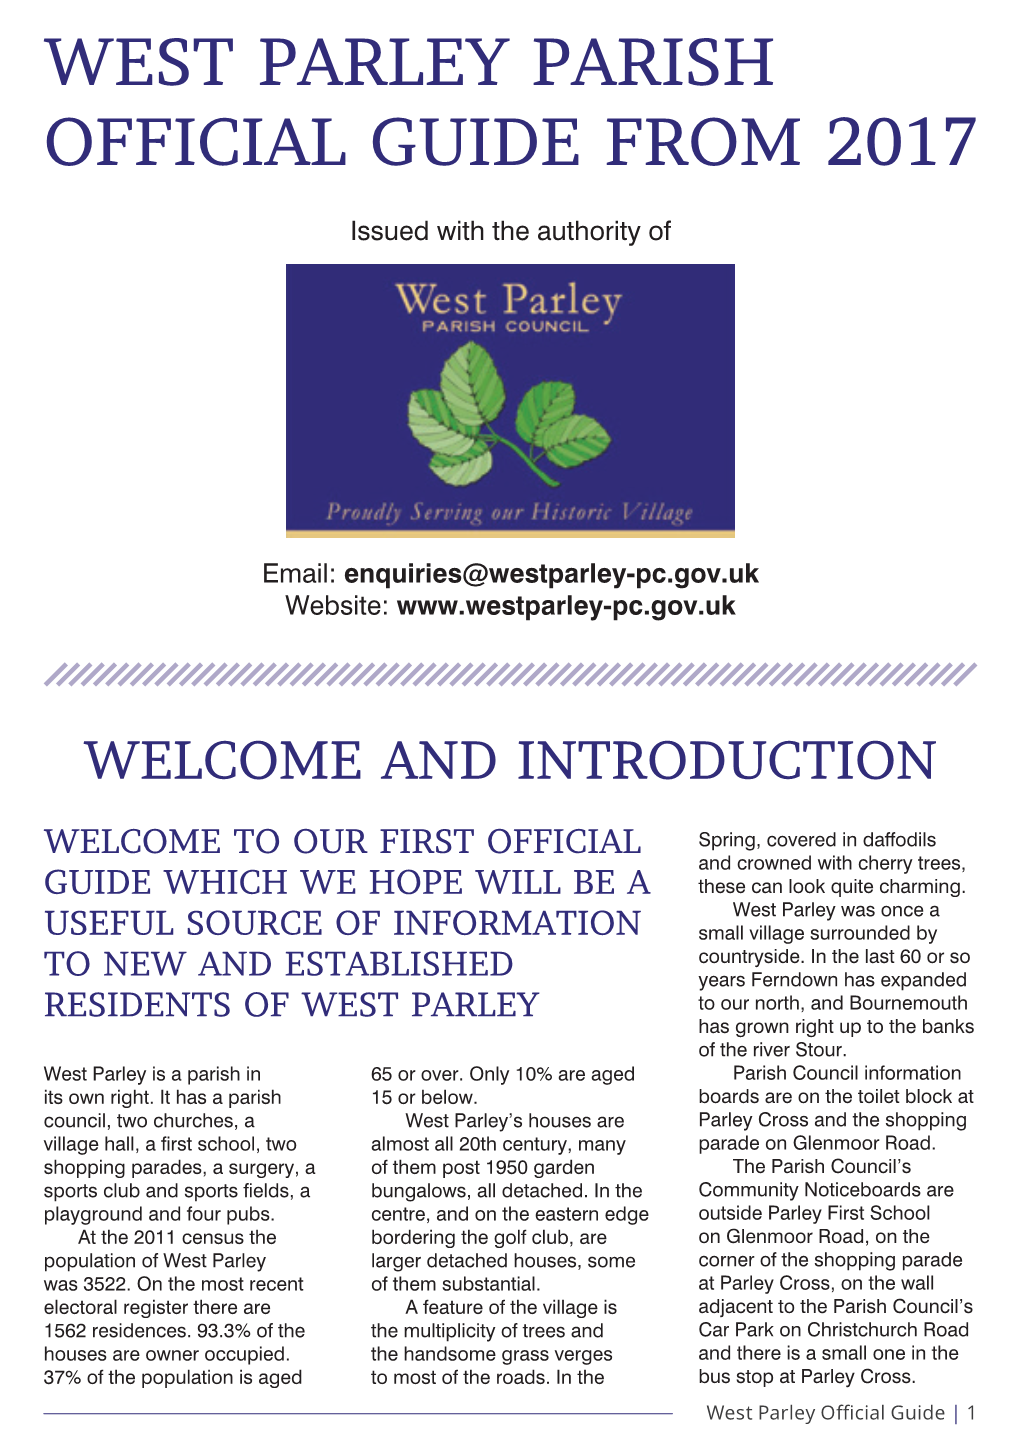 West Parley Parish Official Guide from 2017